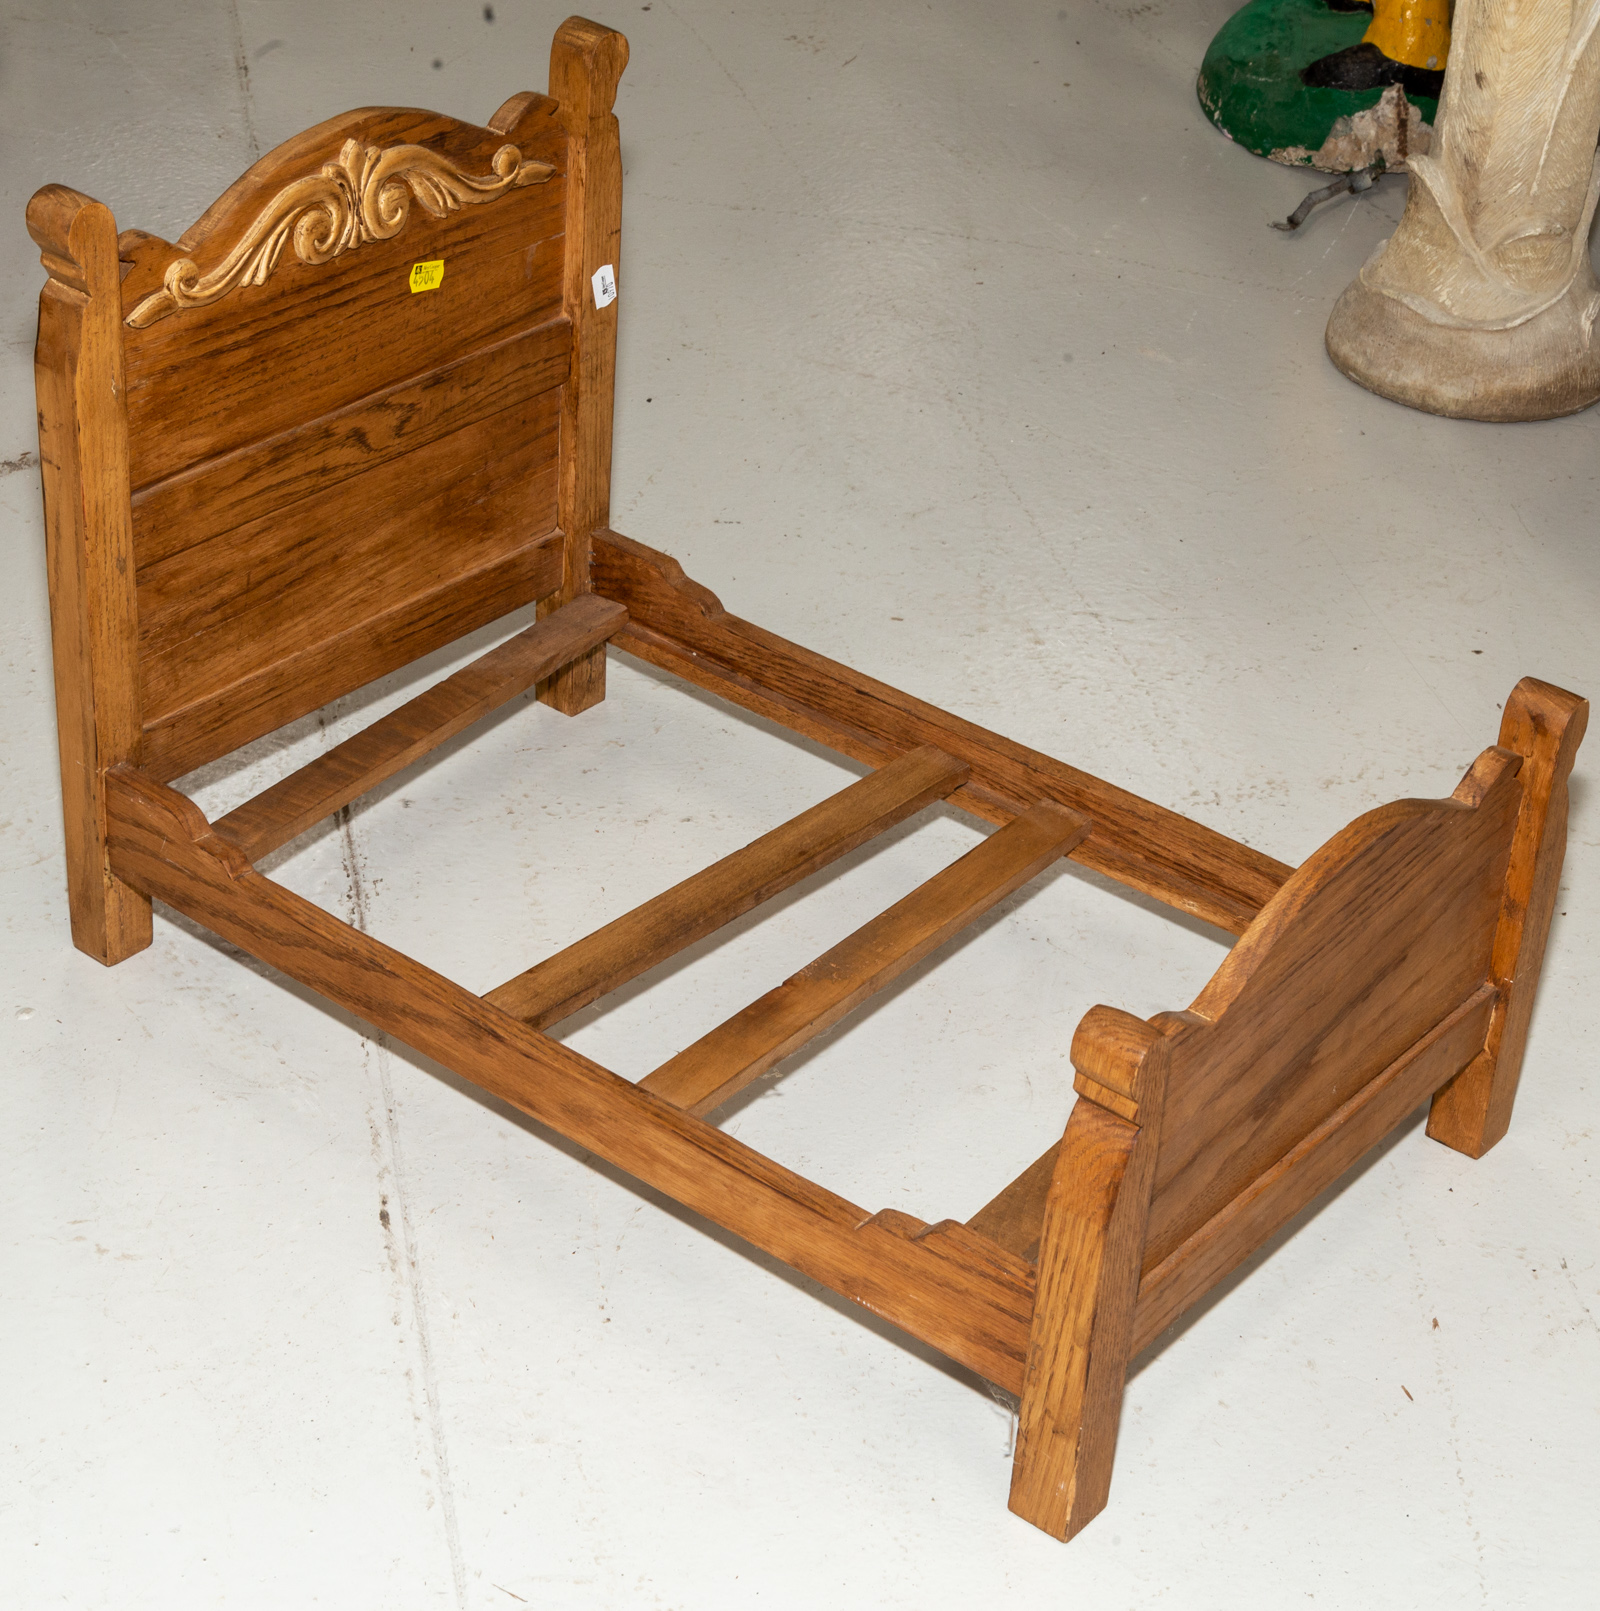 VICTORIAN STYLE OAK DOLL'S BED